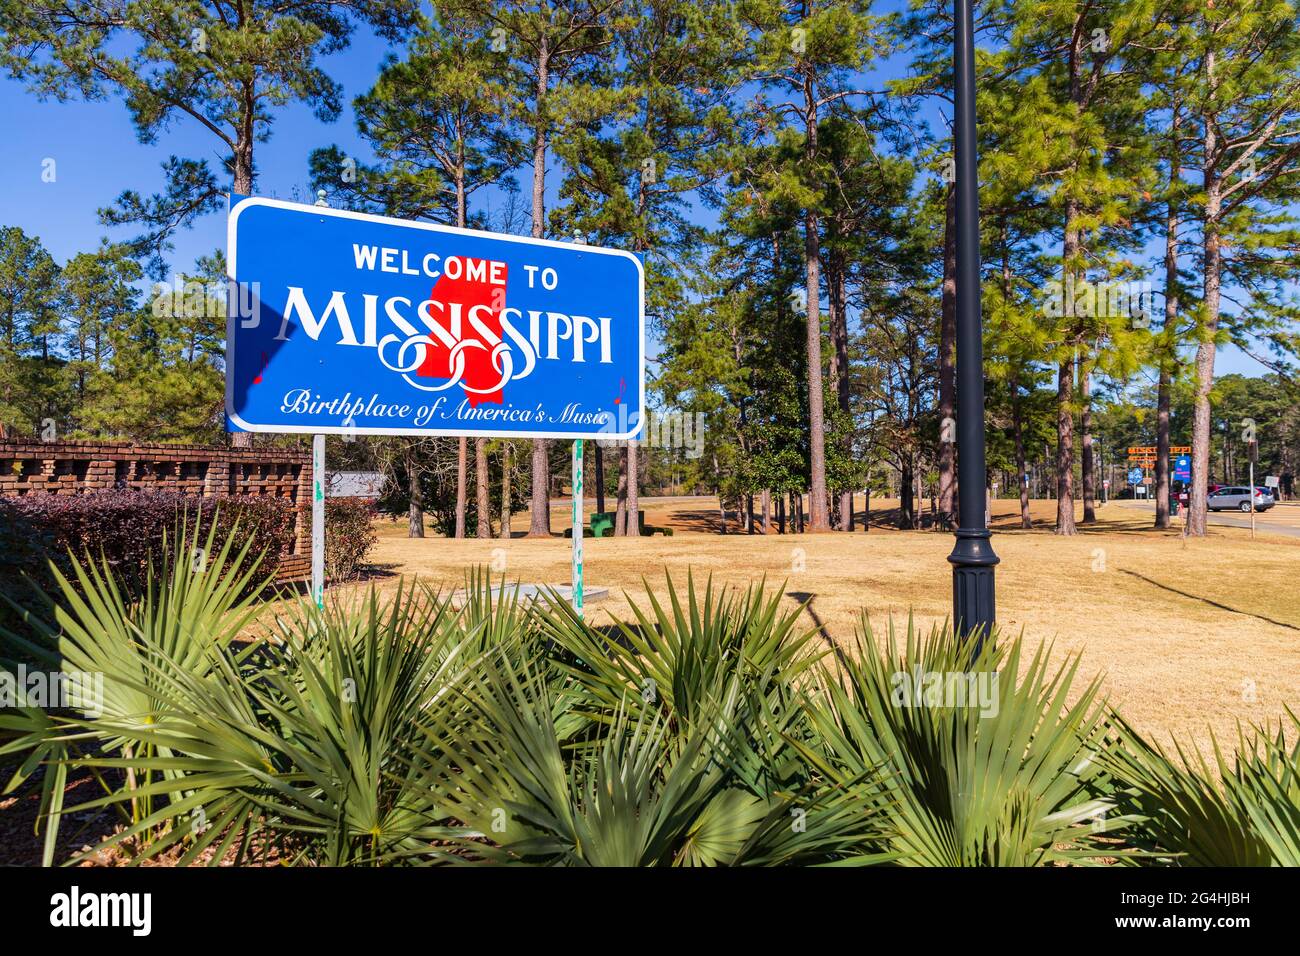 Magnolia, MS - January 14, 2021: Welcome to Mississippi sign, Birthplace of America's Music Stock Photo